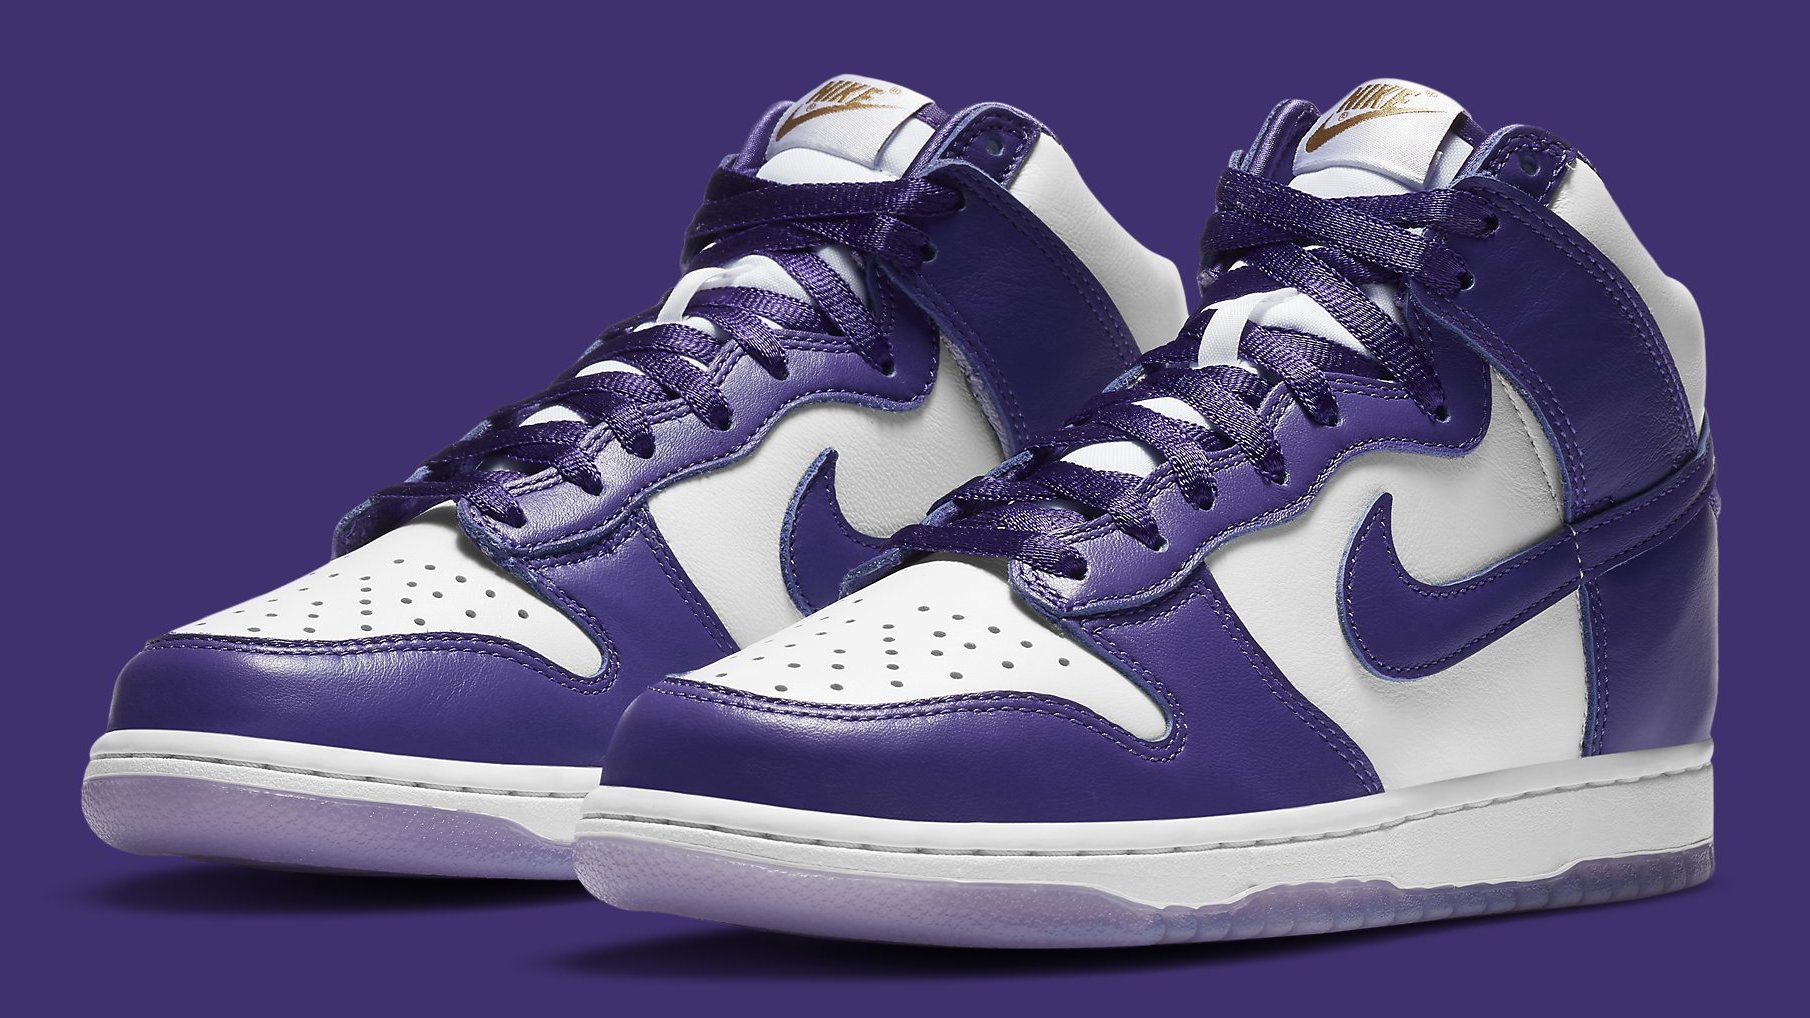 melodie Ingang Erfenis Nike Dunk High Women's Varsity Purple Release Date DC5382-100 | Sole  Collector